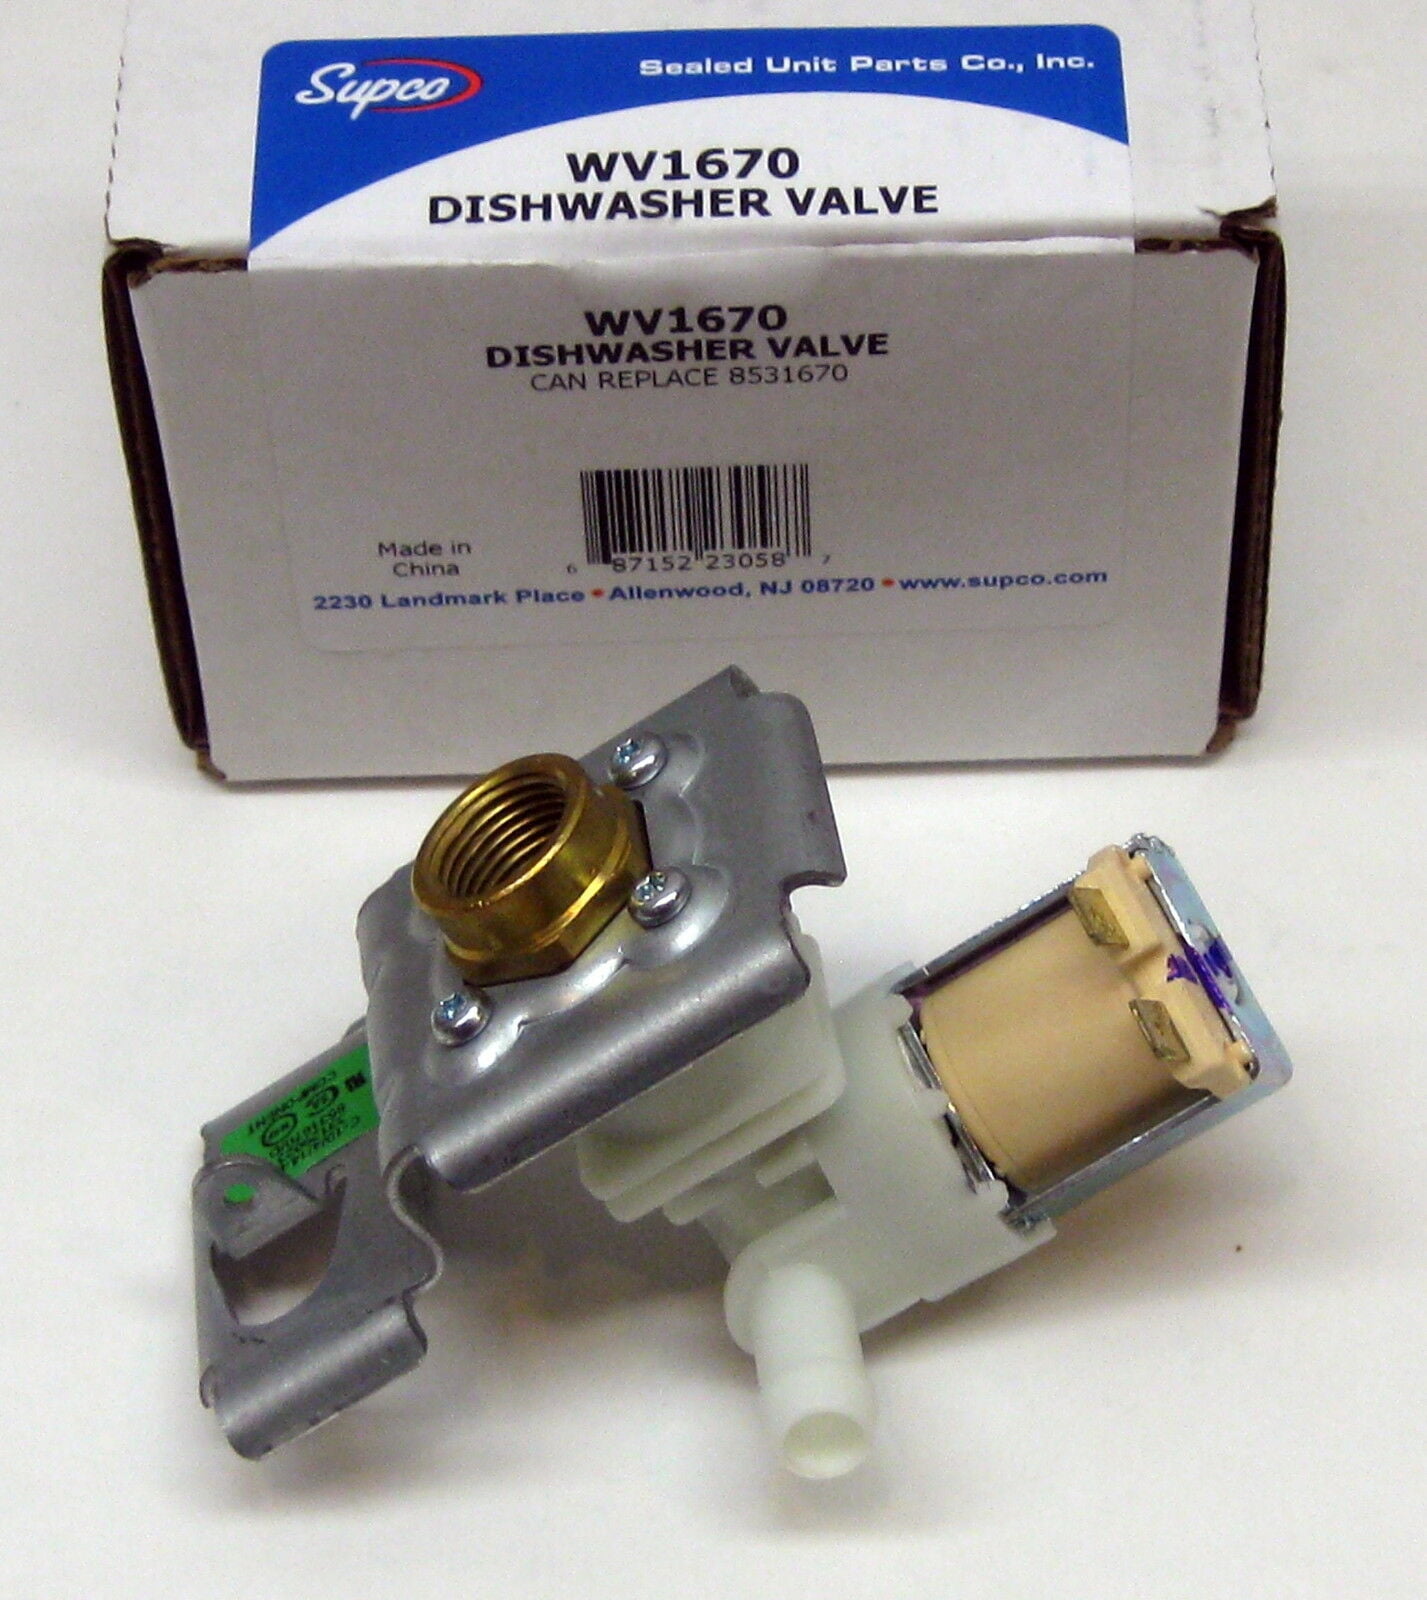 NEW 8531670 8268590 Replacement for Whirlpool Kenmore Dishwasher Inlet Valve 